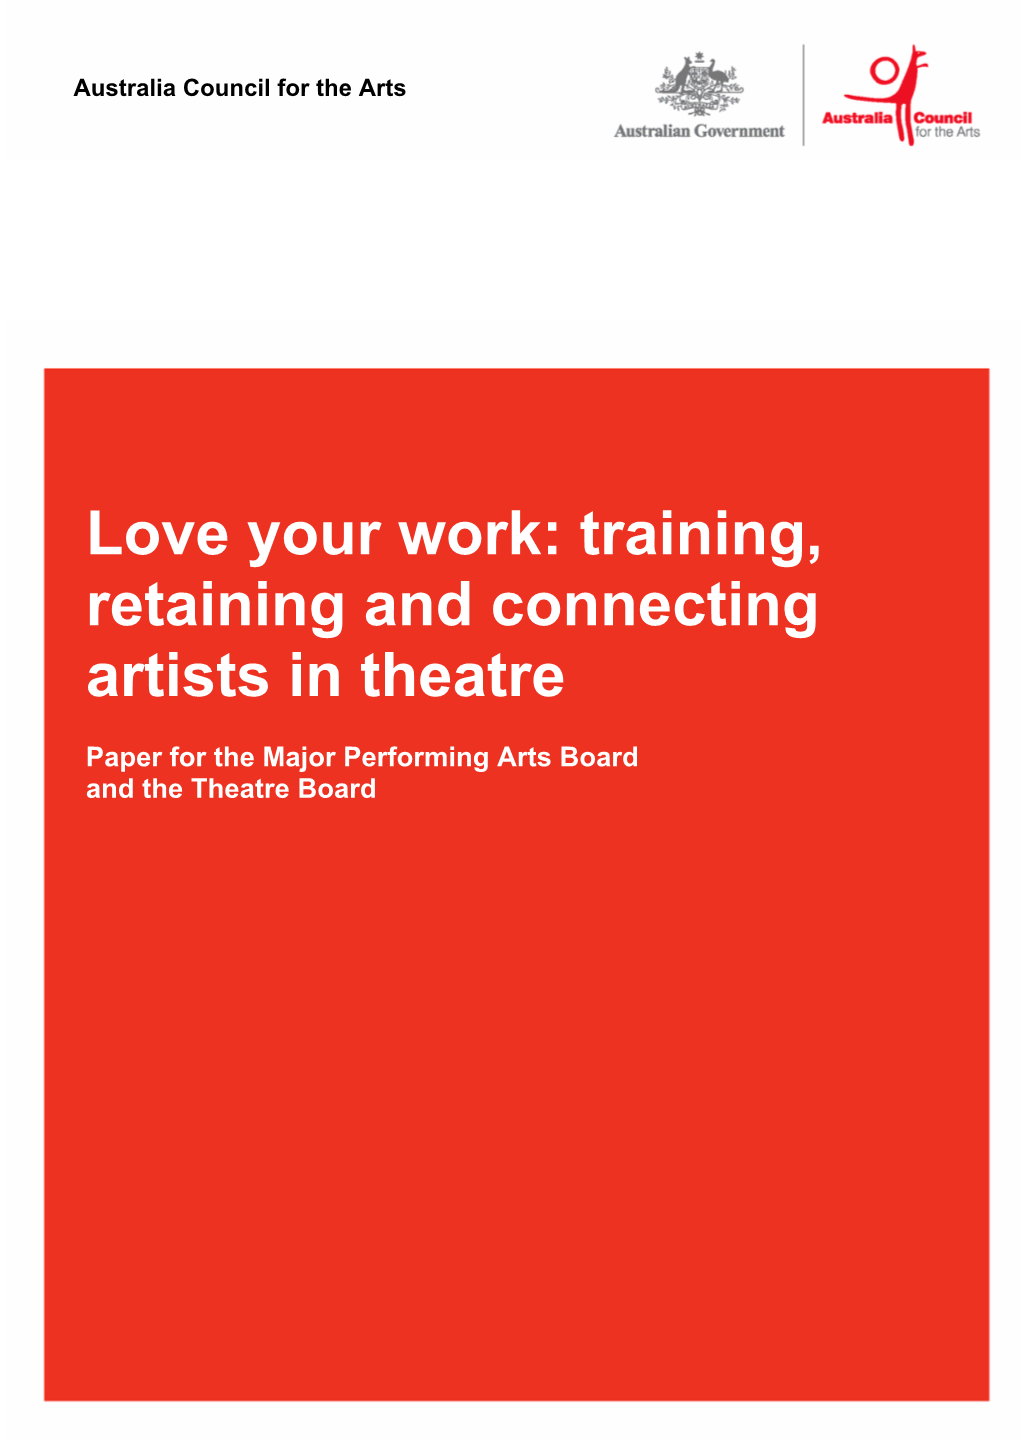 Love Your Work: Training, Retaining and Connecting Artists in Theatre